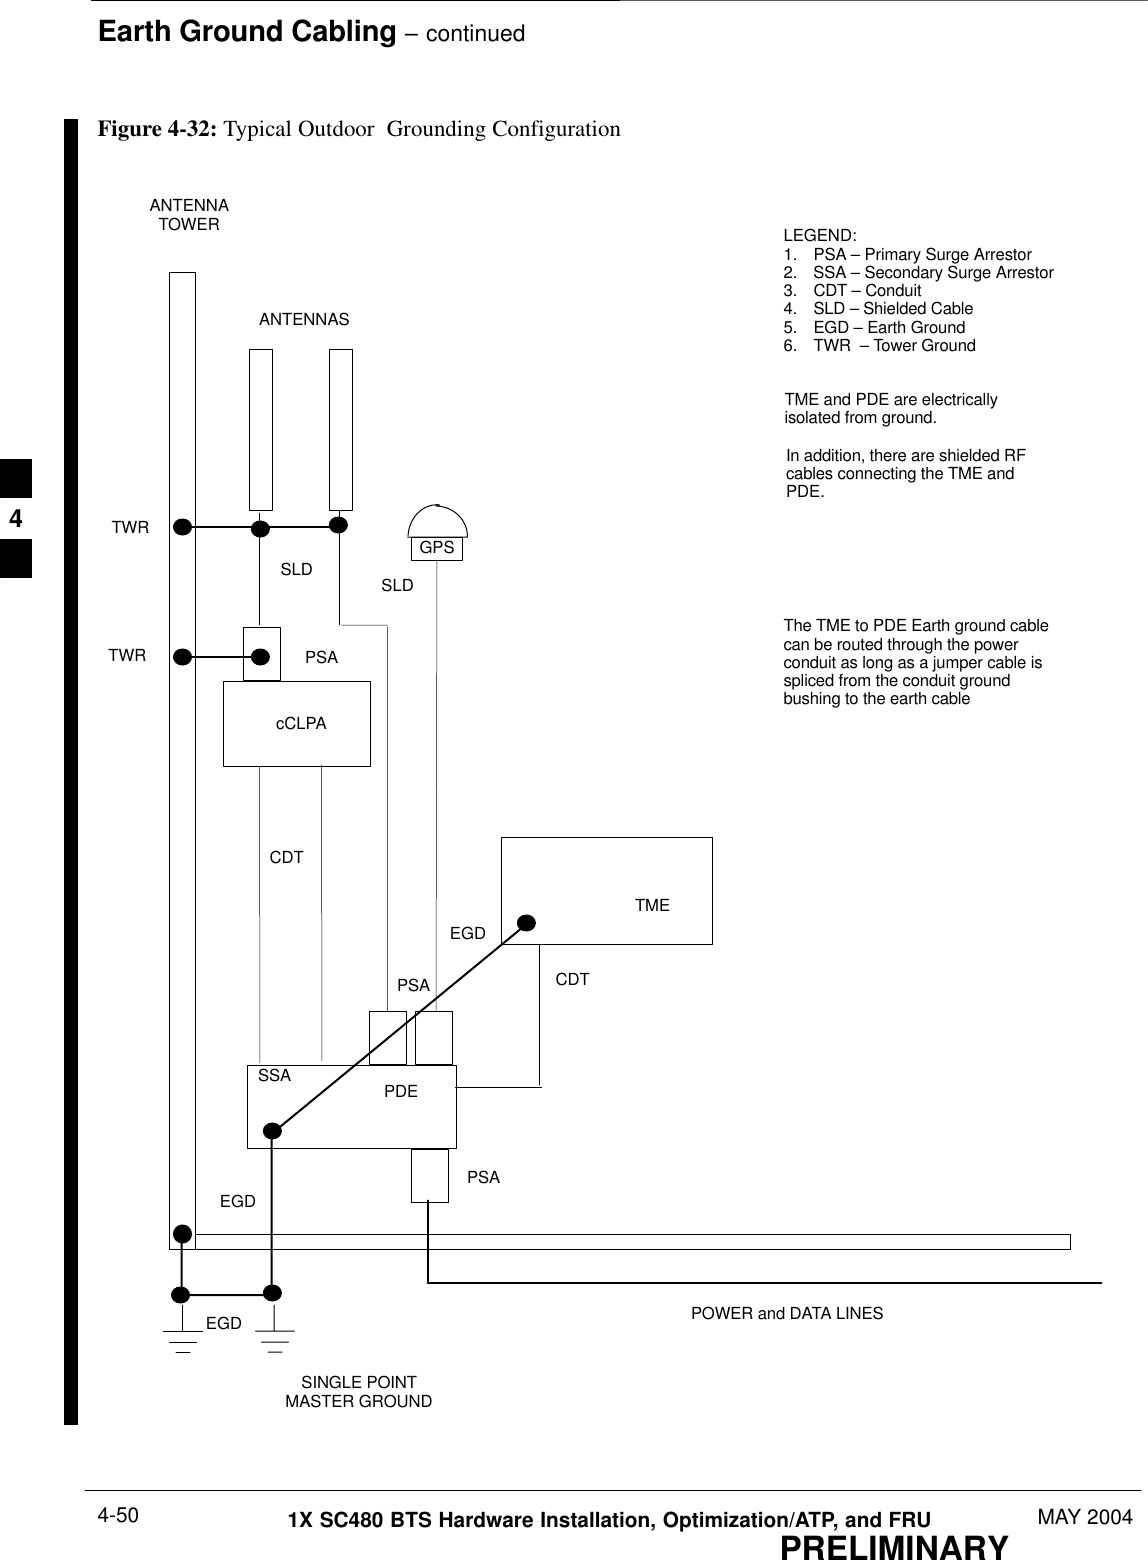 Earth Ground Cabling – continuedPRELIMINARY1X SC480 BTS Hardware Installation, Optimization/ATP, and FRU MAY 20044-50Figure 4-32: Typical Outdoor  Grounding ConfigurationLEGEND:1. PSA – Primary Surge Arrestor2. SSA – Secondary Surge Arrestor3. CDT – Conduit4. SLD – Shielded Cable5. EGD – Earth Ground6. TWR  – Tower GroundSLDPDETMEGPScCLPAANTENNASANTENNATOWERPSAPSAPSASSACDTPOWER and DATA LINESSINGLE POINTMASTER GROUNDEGDEGDTWREGDSLDCDTTWRTME and PDE are electricallyisolated from ground.In addition, there are shielded RFcables connecting the TME andPDE.The TME to PDE Earth ground cablecan be routed through the powerconduit as long as a jumper cable isspliced from the conduit groundbushing to the earth cable4